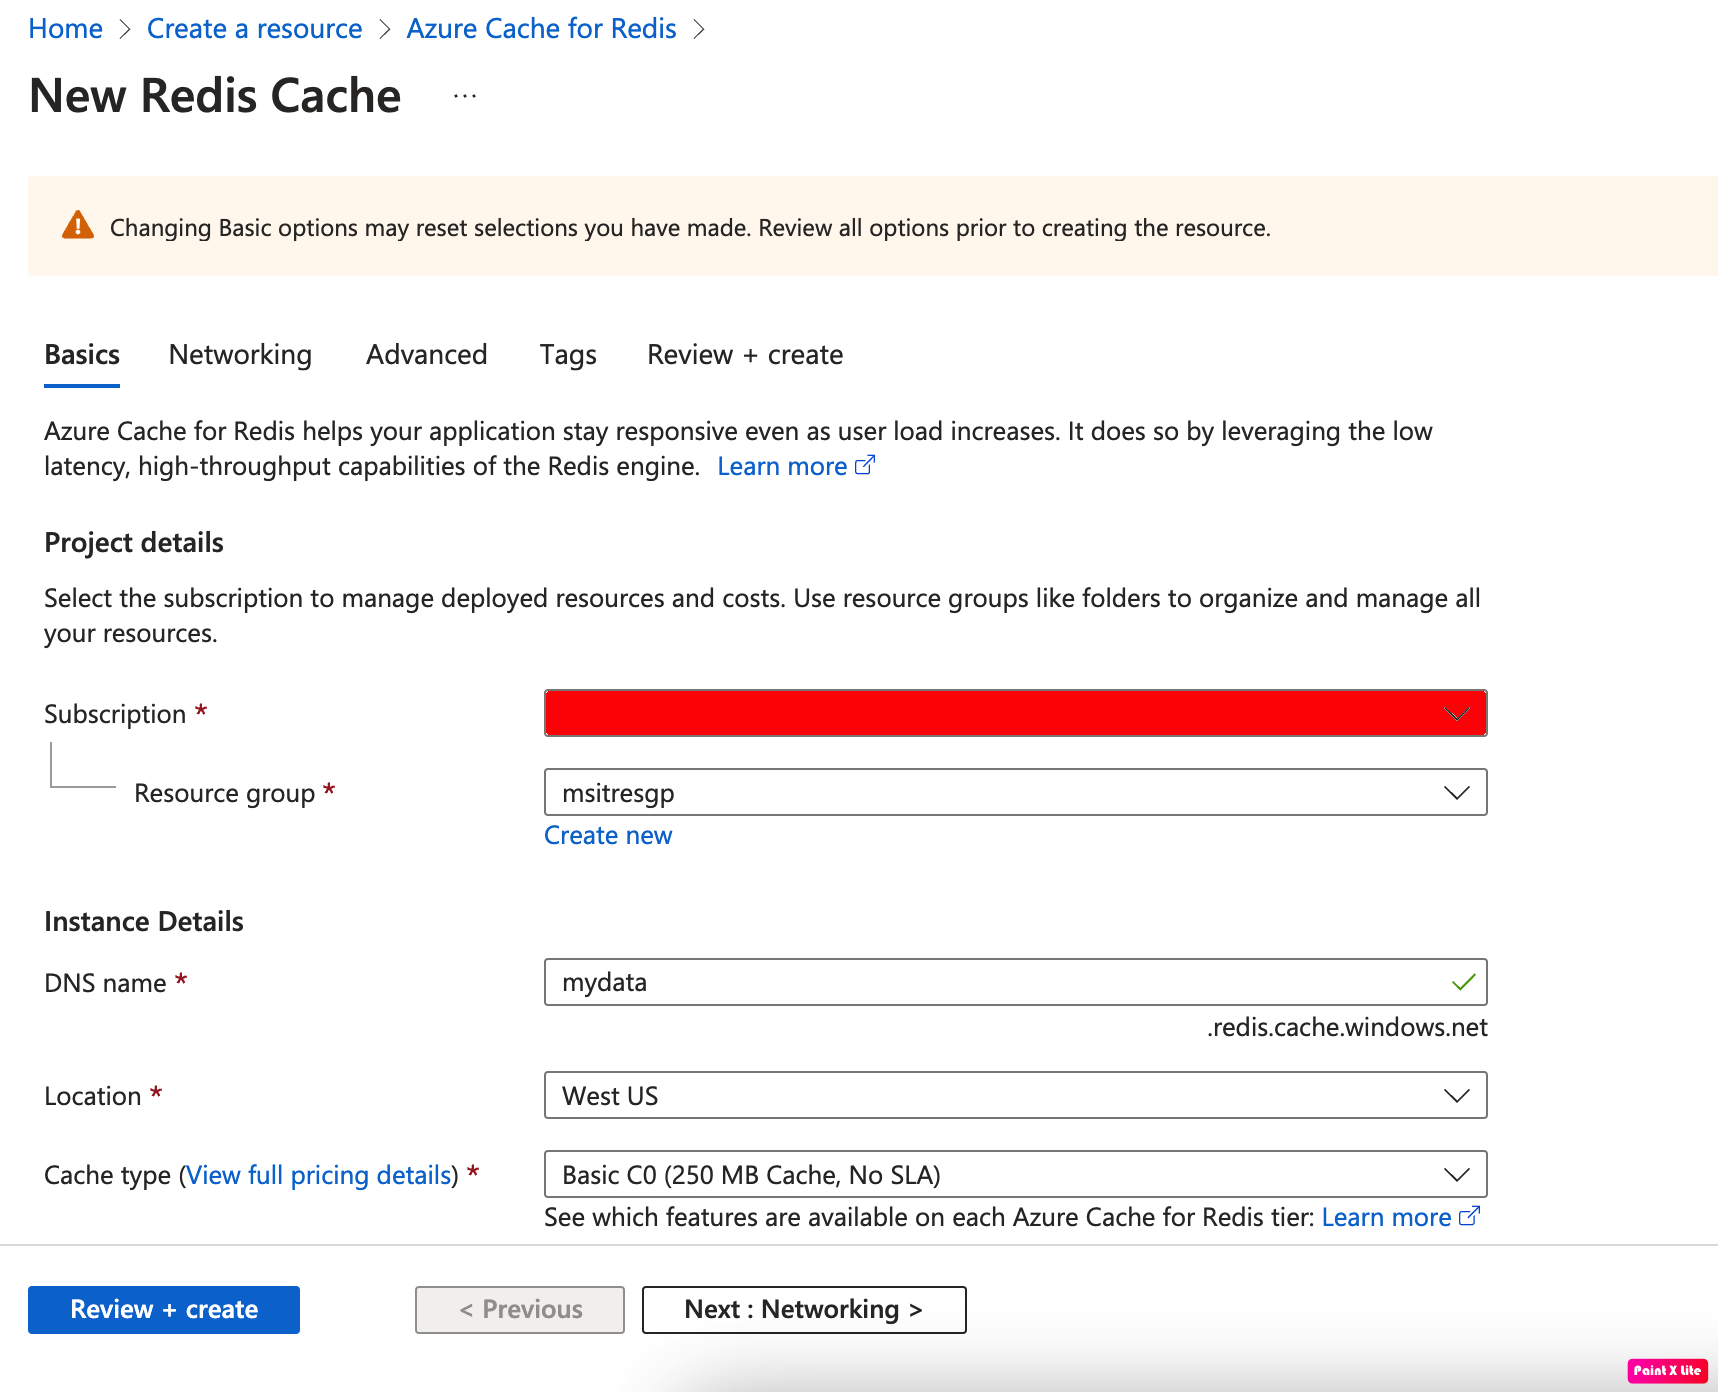 Implementing Distributed Caching ASP.NET Core 6 using the Redis Cache In Microsoft Azure